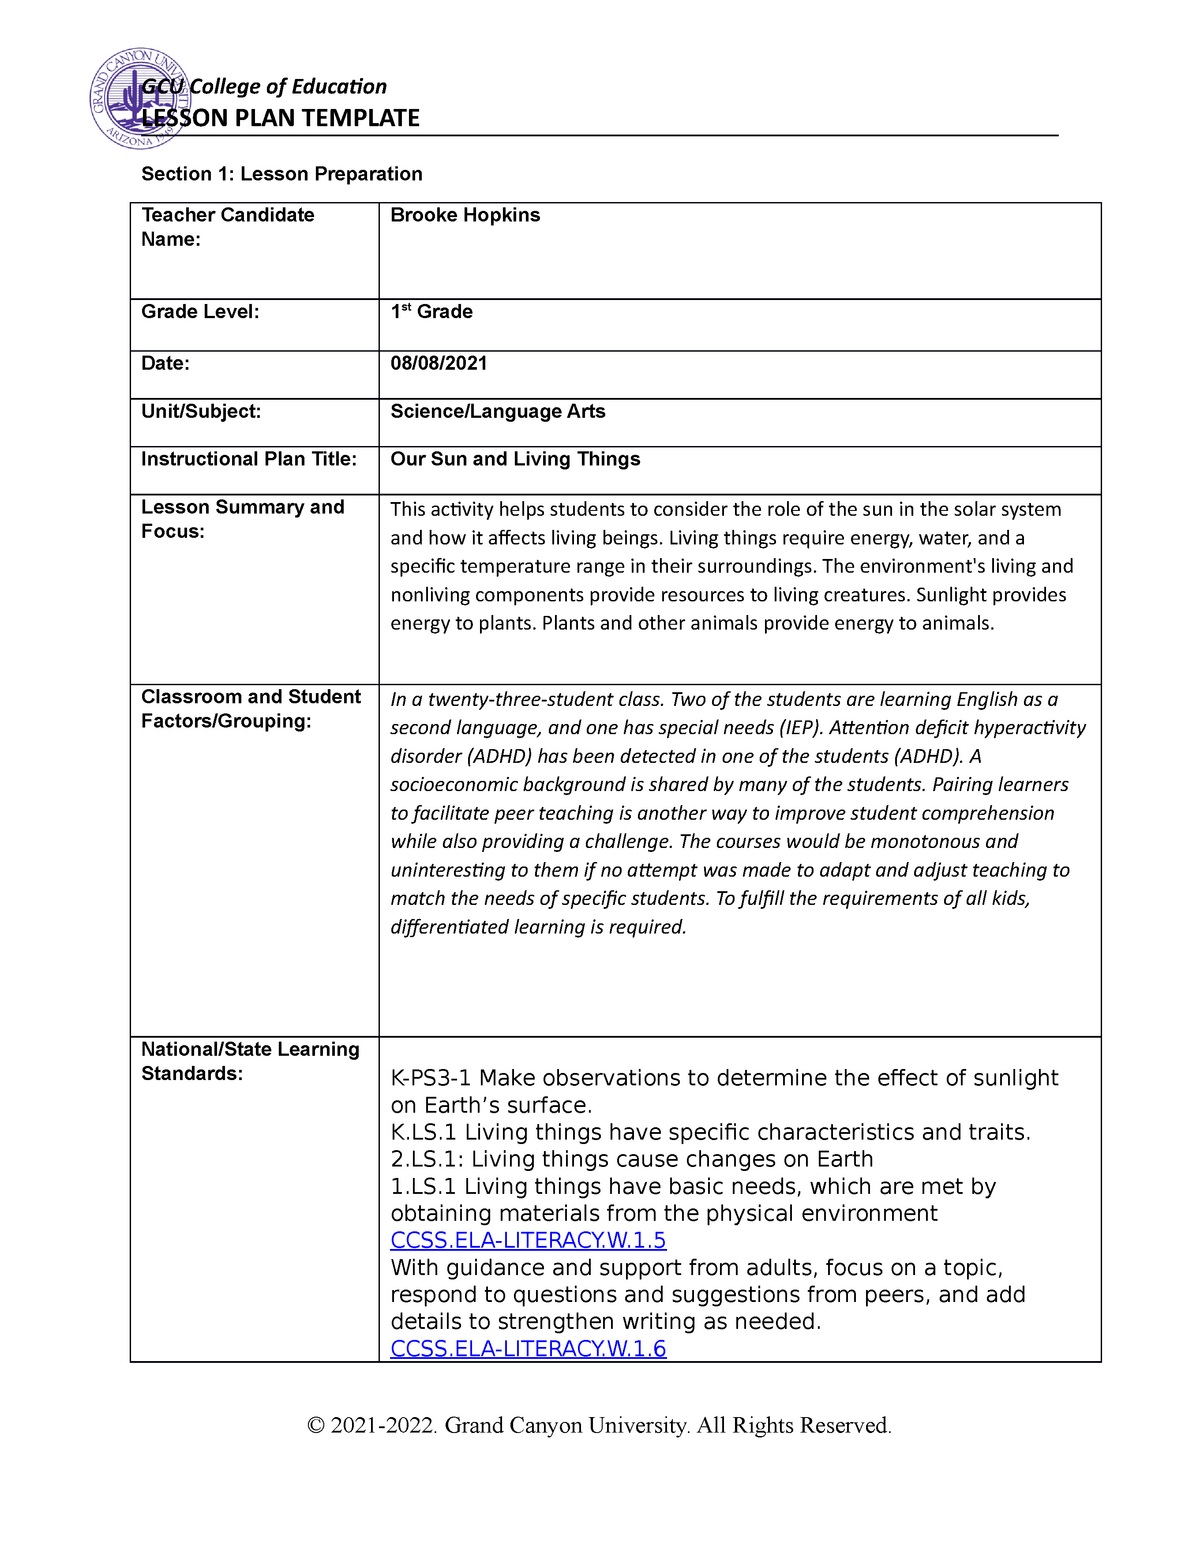 Coelessonplantemplate 4600 update LESSON PLAN TEMPLATE Section 1